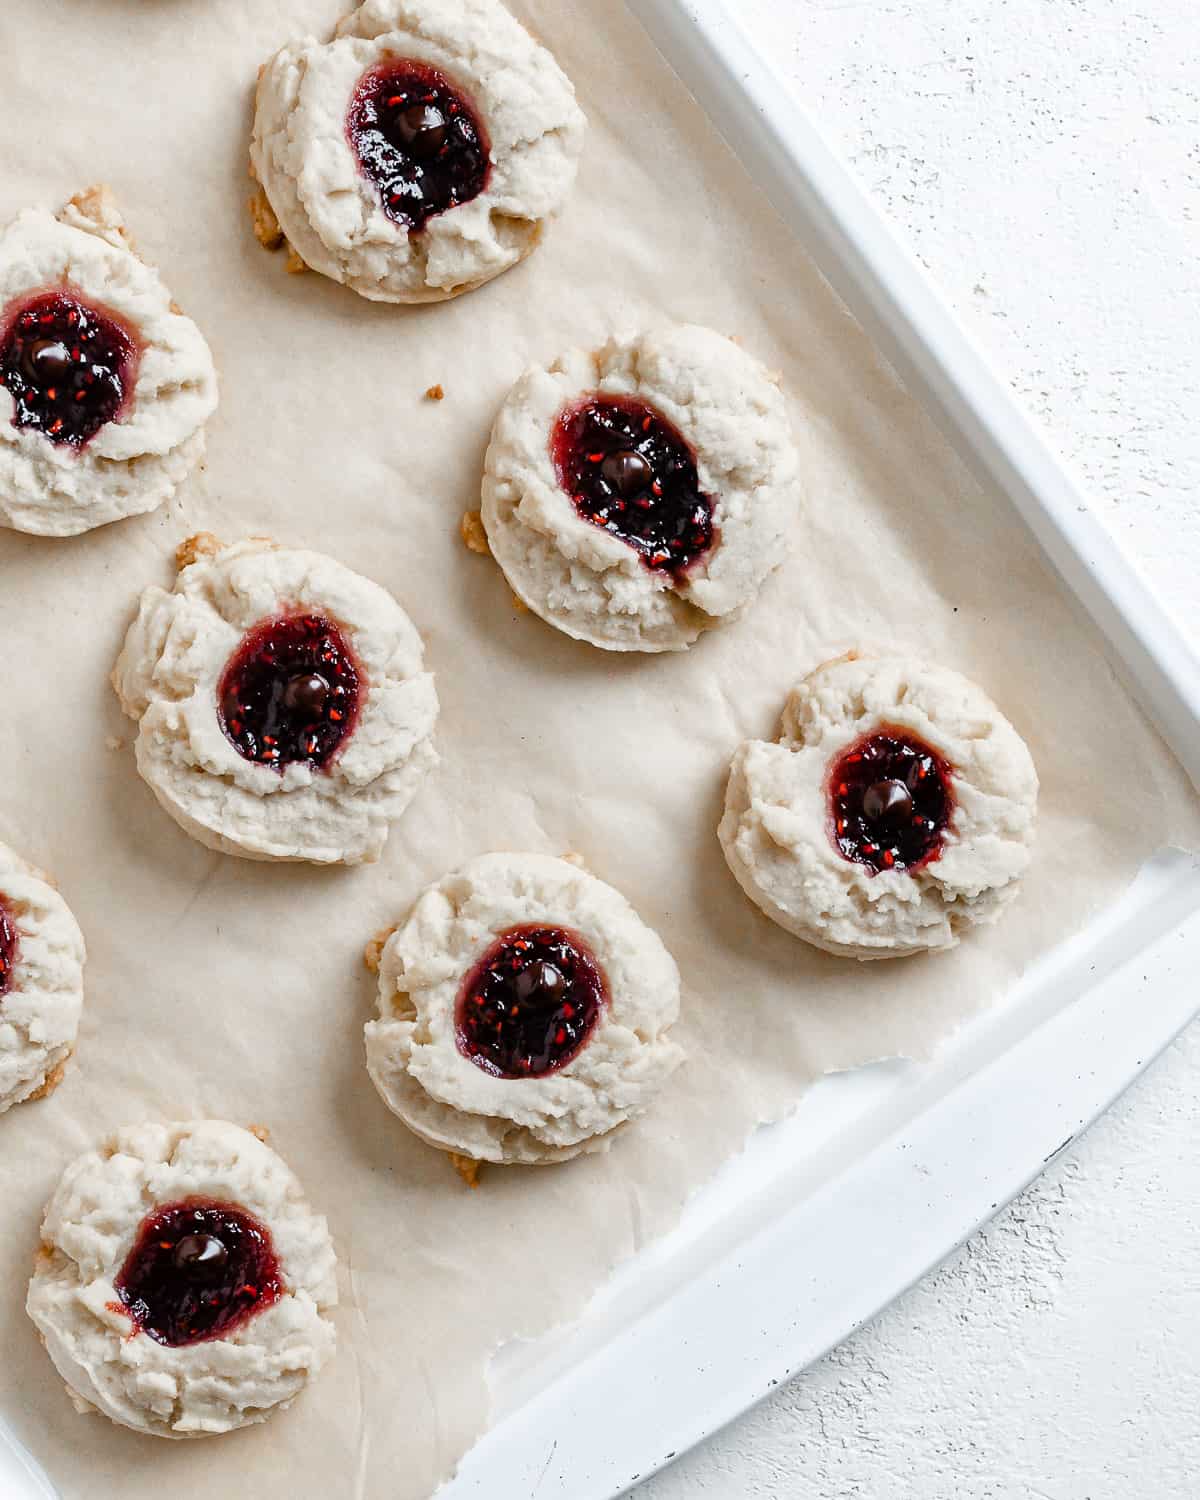 completed Raspberry Jam Thumbprint Cookies scattered on a baking sheet